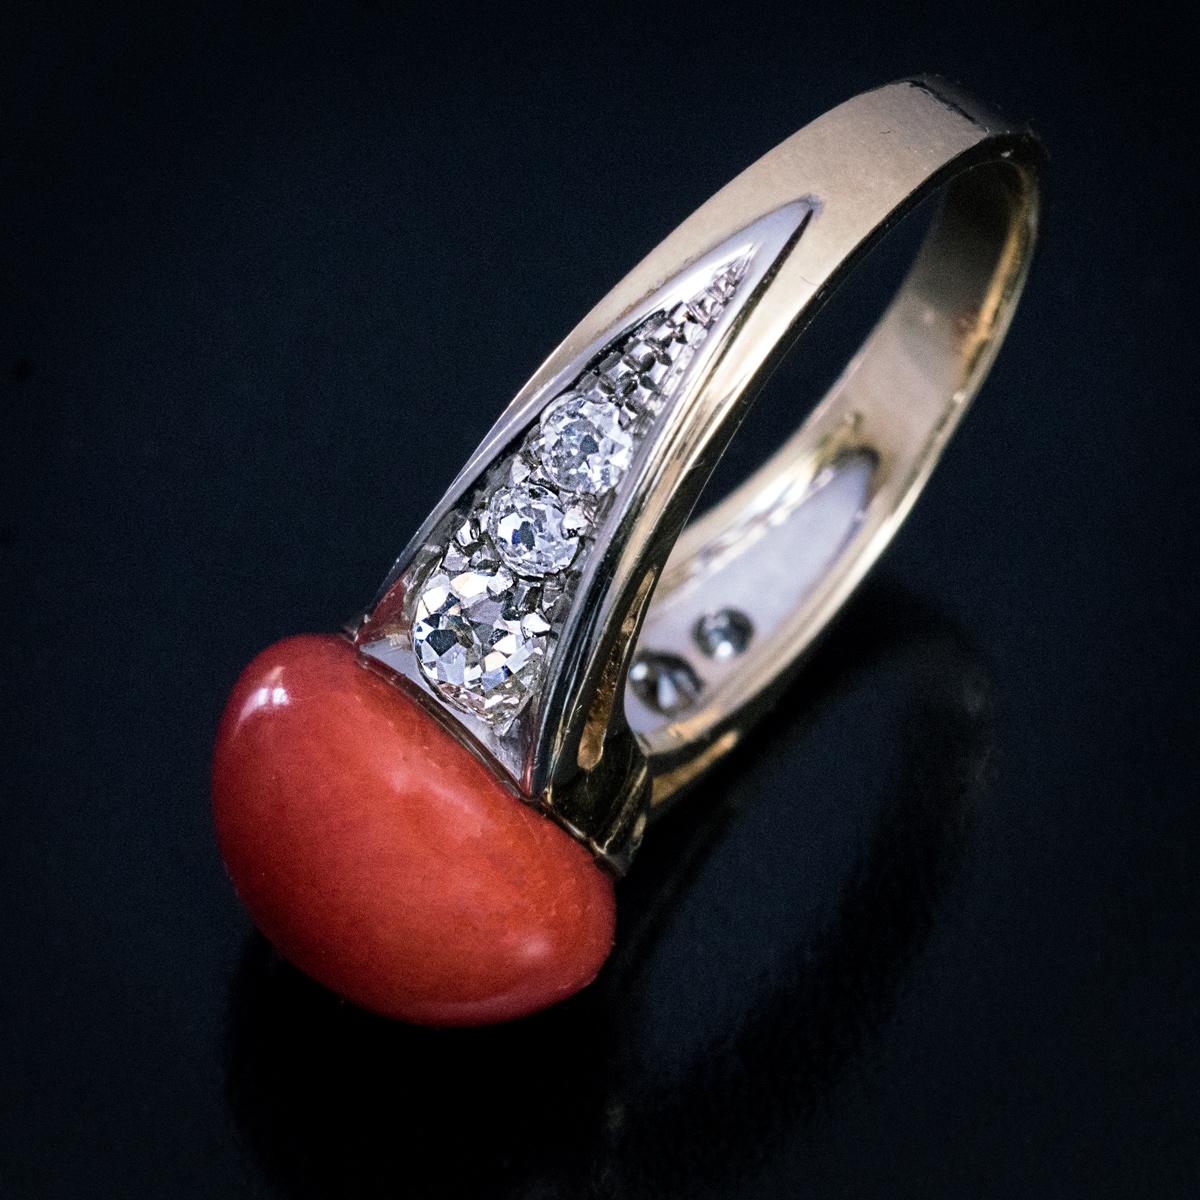 Circa 1925

This striking Art Deco era ring features a carved 12 mm wide natural coral of an excellent color. The coral is flanked by 6 chunky old mine cut diamonds. The ring is crafted in platinum and 18K gold.

Estimated total diamond weight is